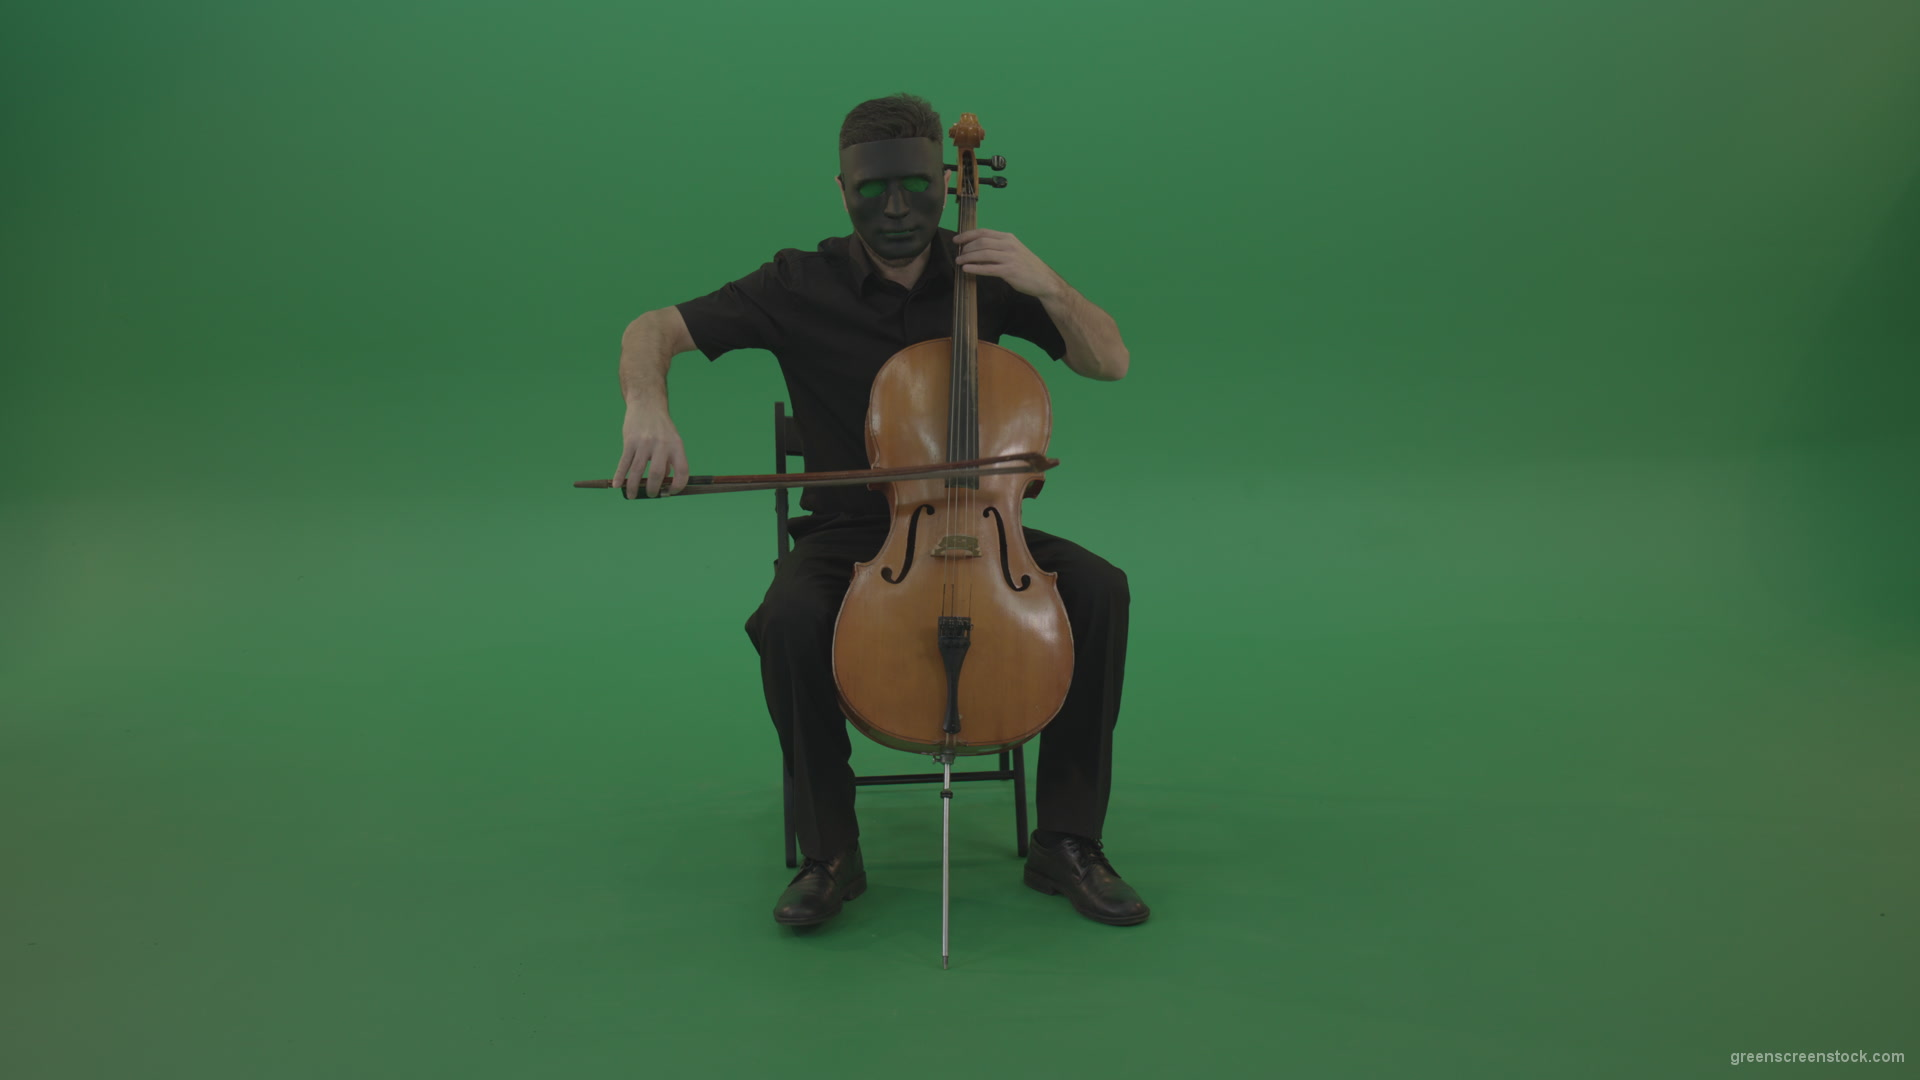 Full-size-man-in-black-wear-and-mask-play-violoncello-cello-strings-music-instrument-isolated-on-green-screen_005 Green Screen Stock